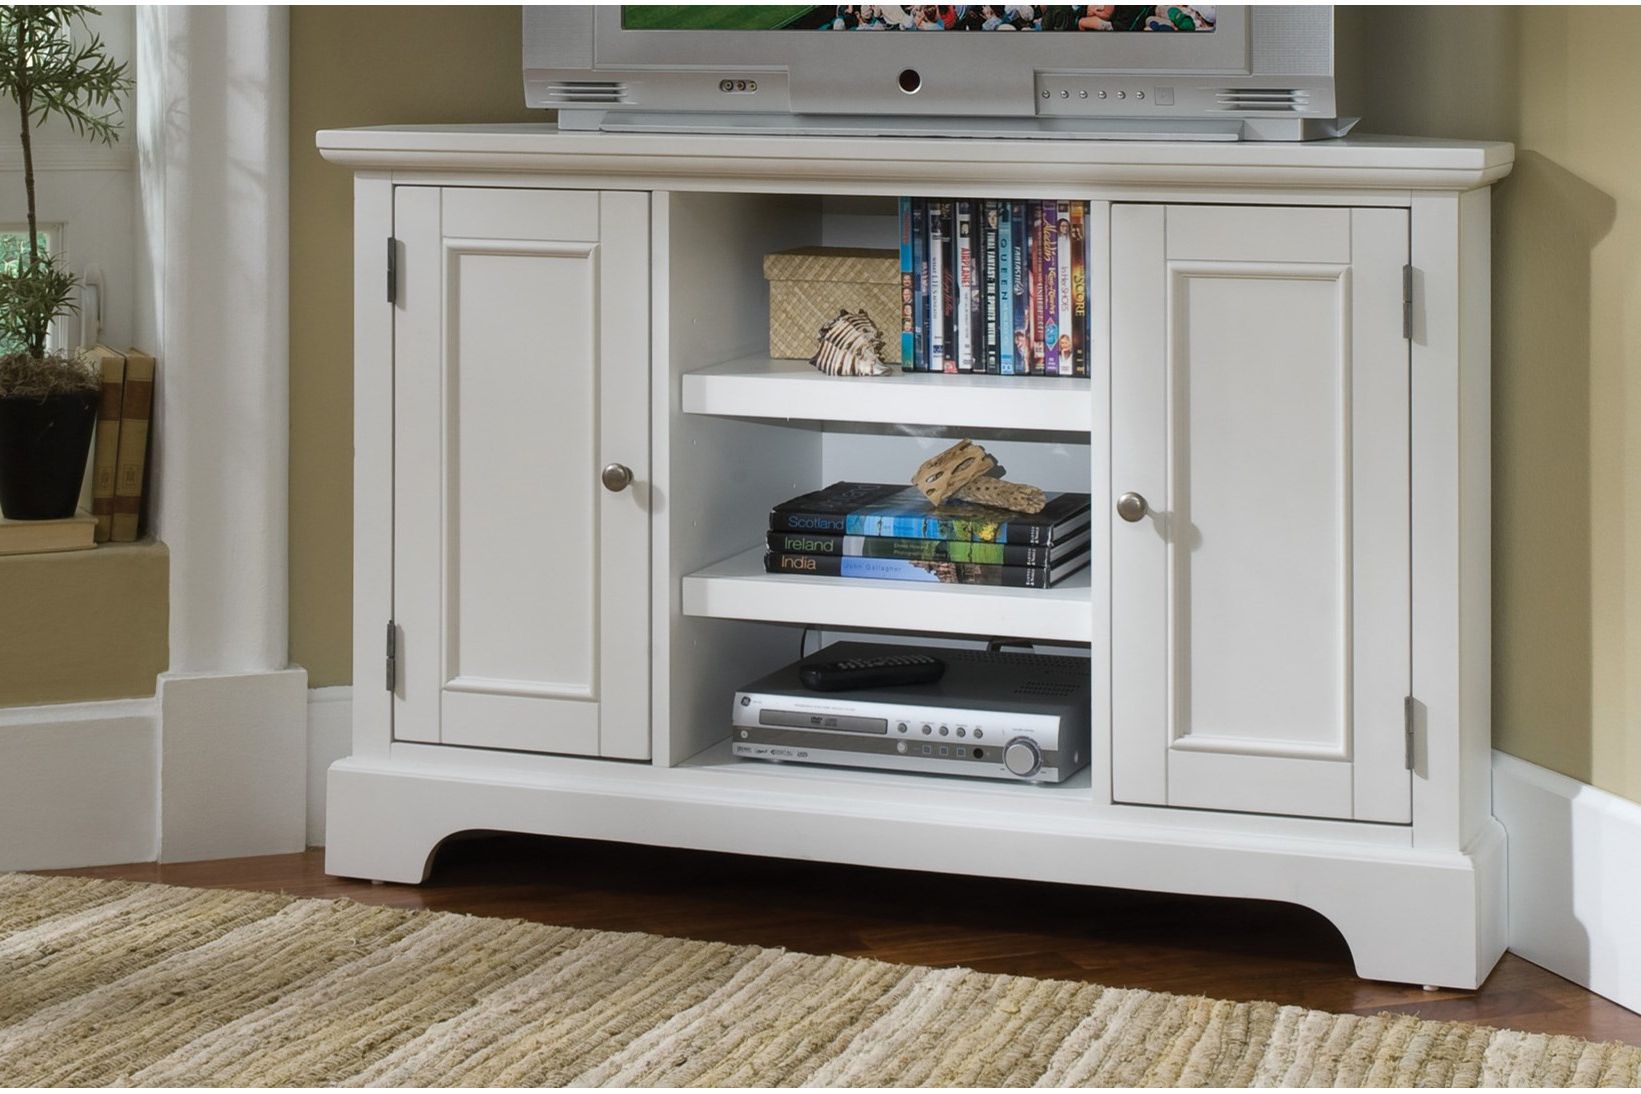 Tv Cabinet With Doors Stands Best Buy Corner Stand For 55 Inch Sears Throughout Trendy Corner Tv Cabinets For Flat Screens With Doors (View 9 of 20)